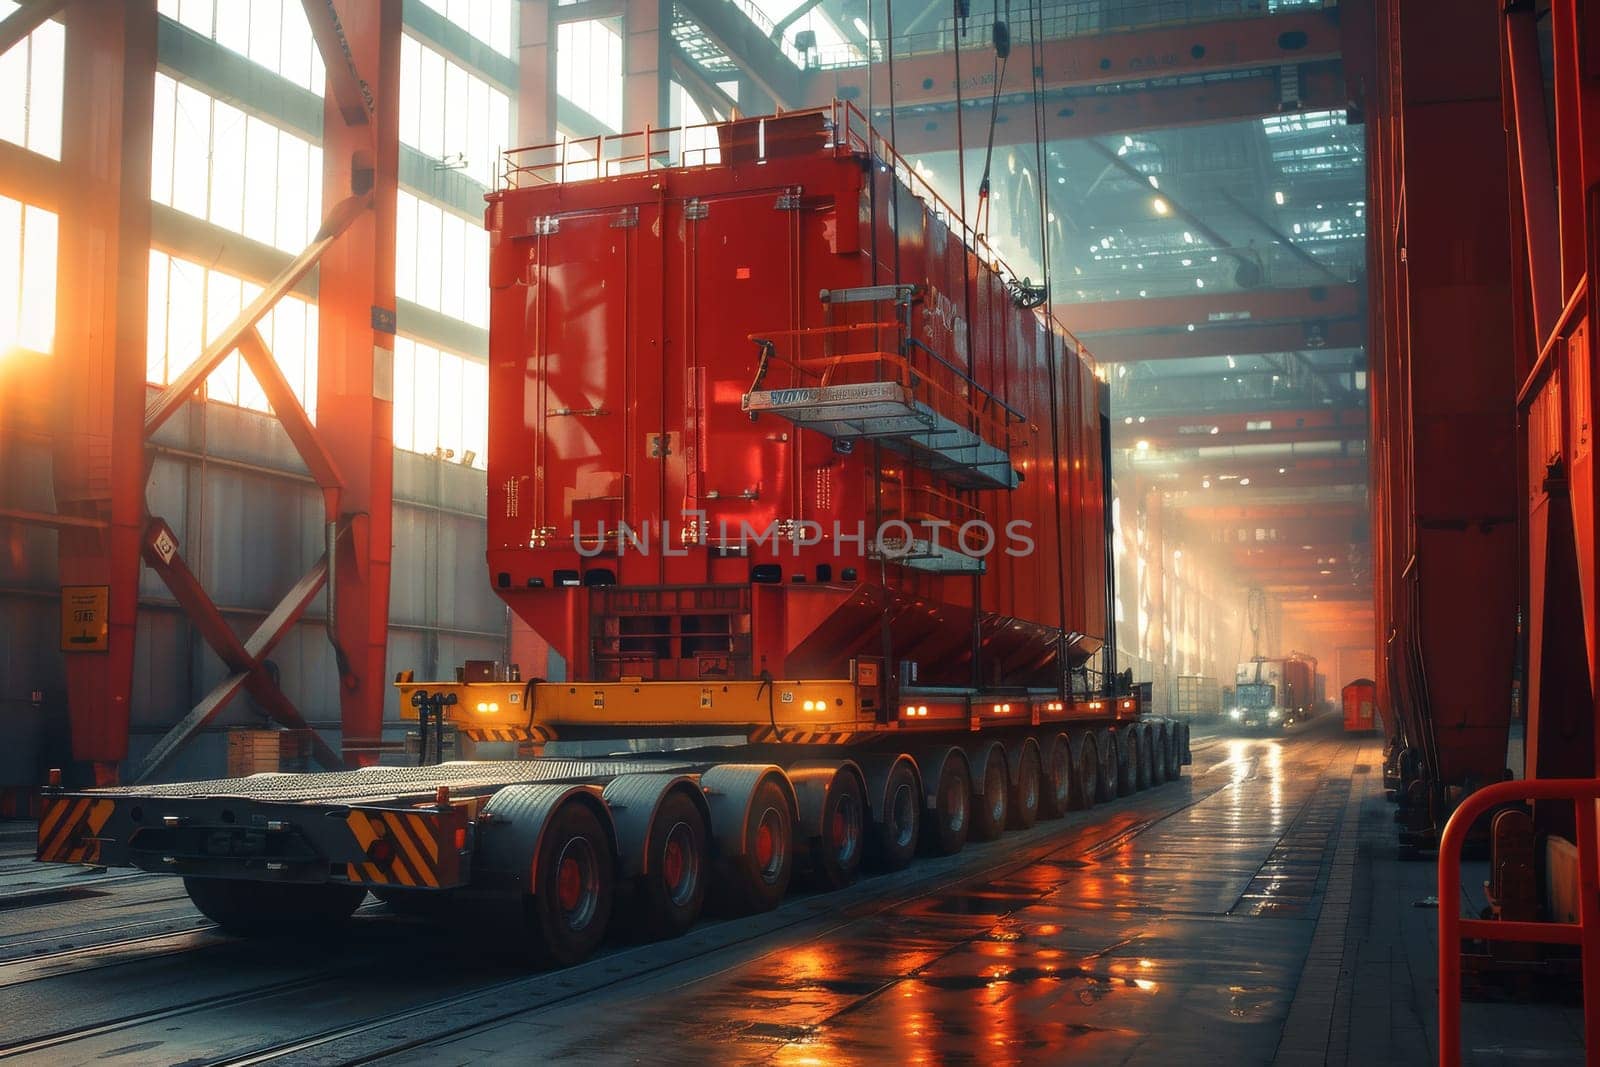 A large red truck is being loaded with a large object in a warehouse. Scene is industrial and busy, with the truck being the center of attention